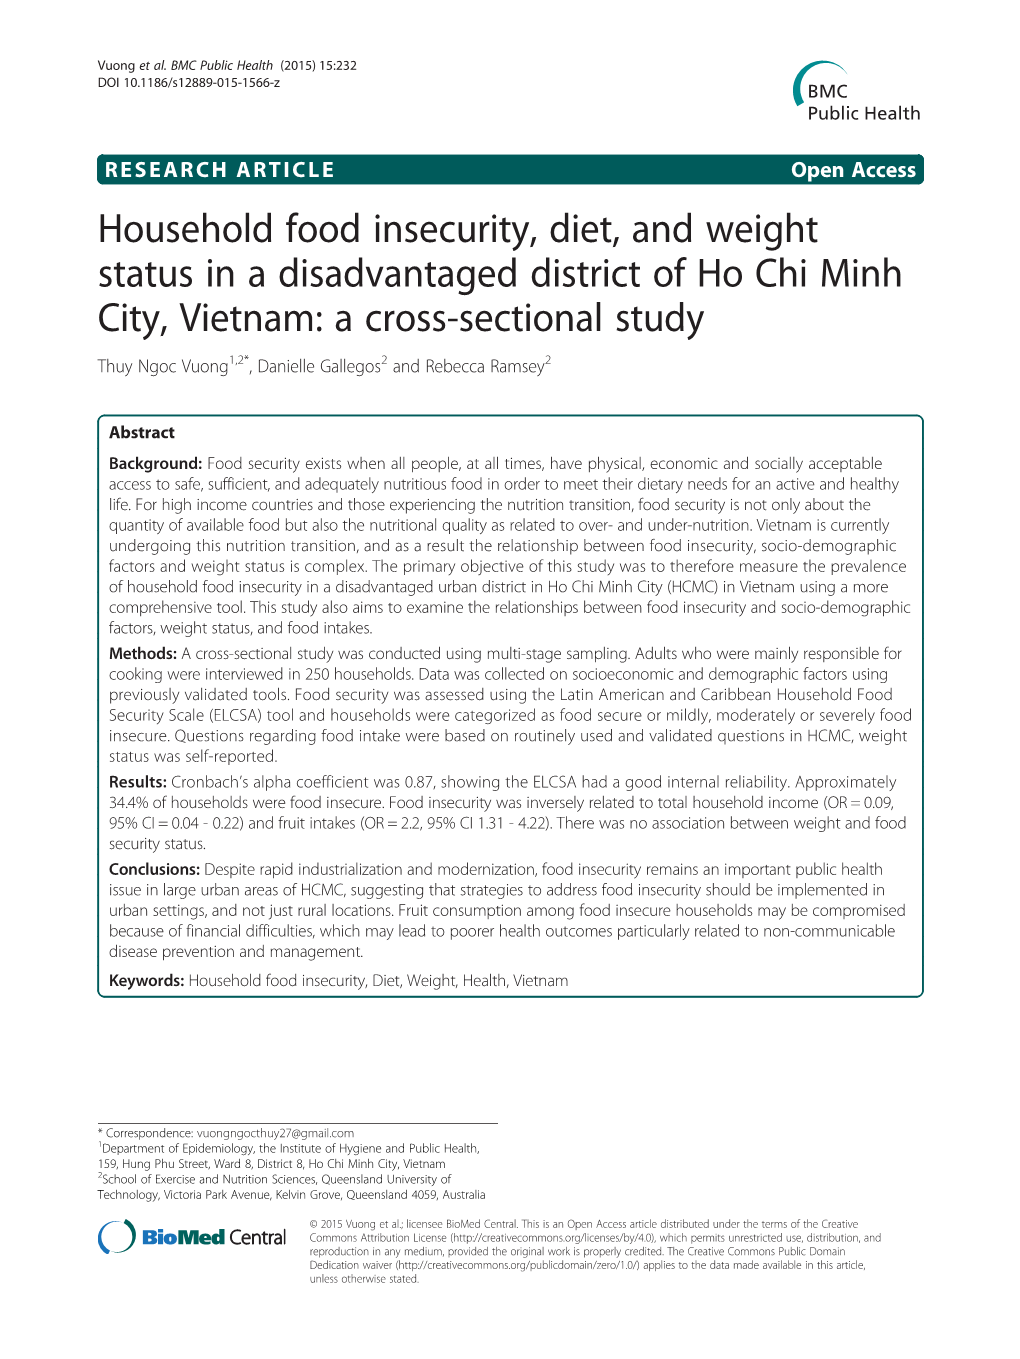 Household Food Insecurity, Diet, and Weight Status in a Disadvantaged District of Ho Chi Minh City, Vietnam: a Cross-Sectional S